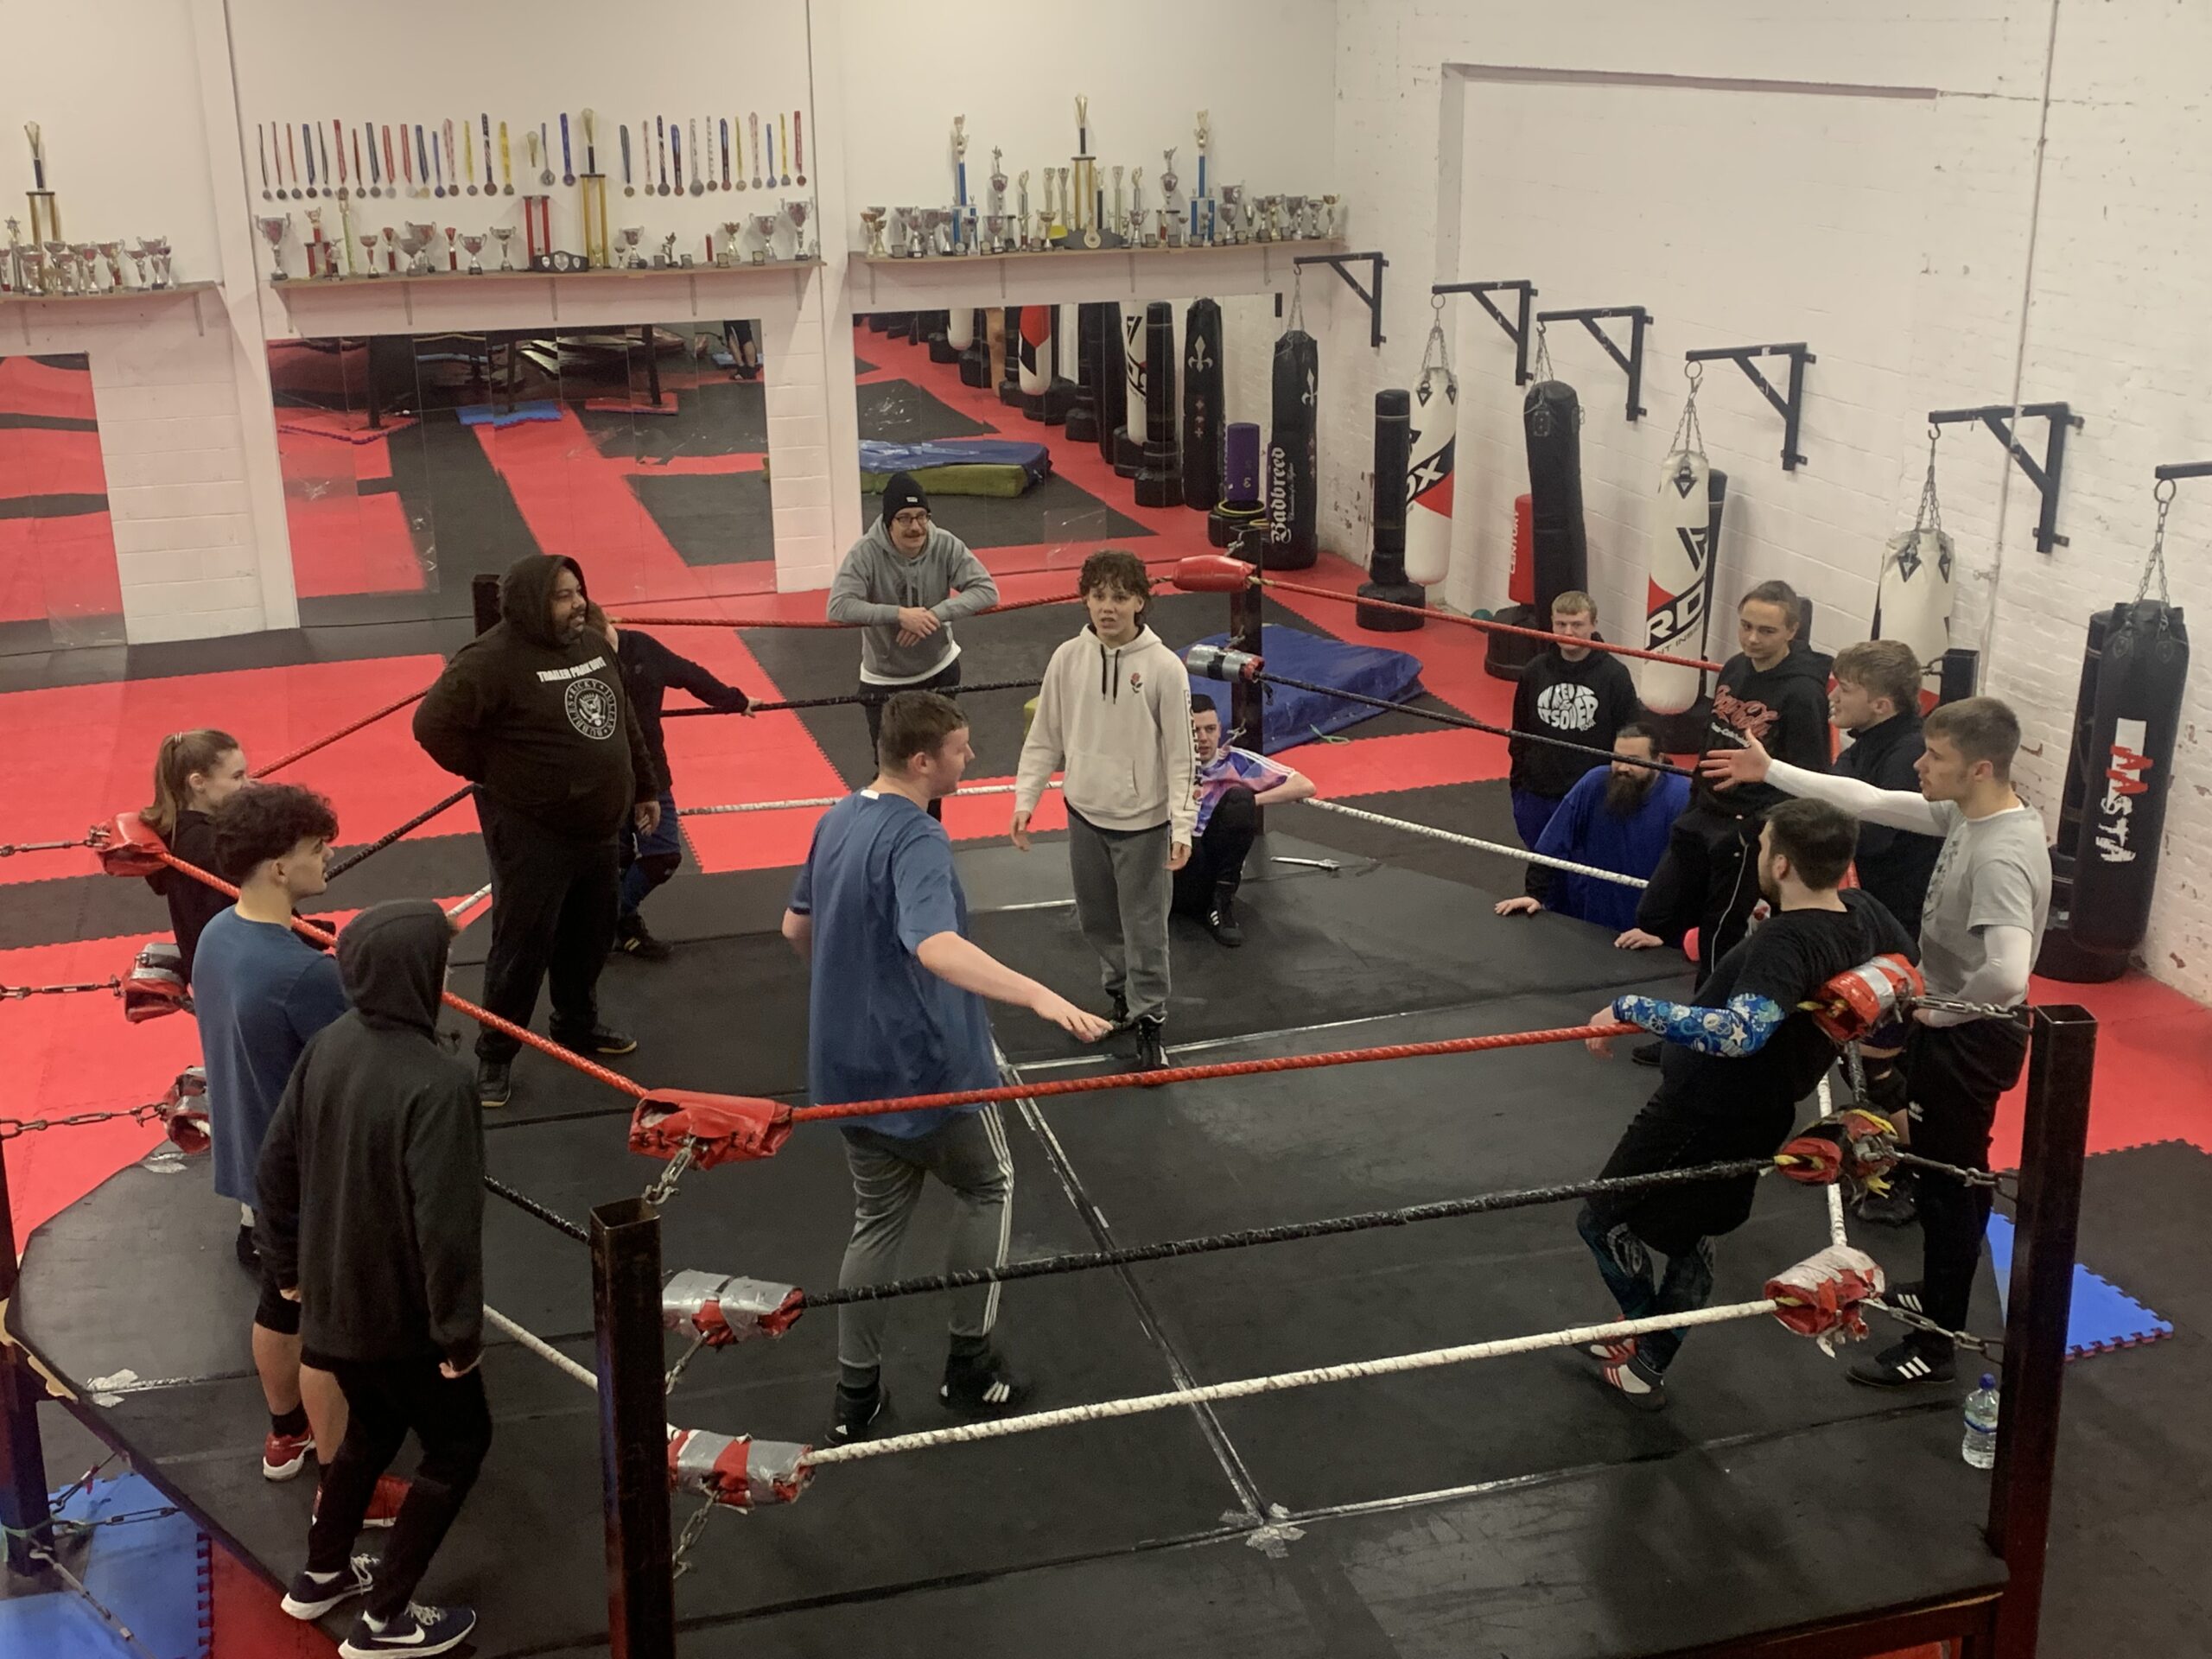 Students in the ring during a training session for full tilt academy